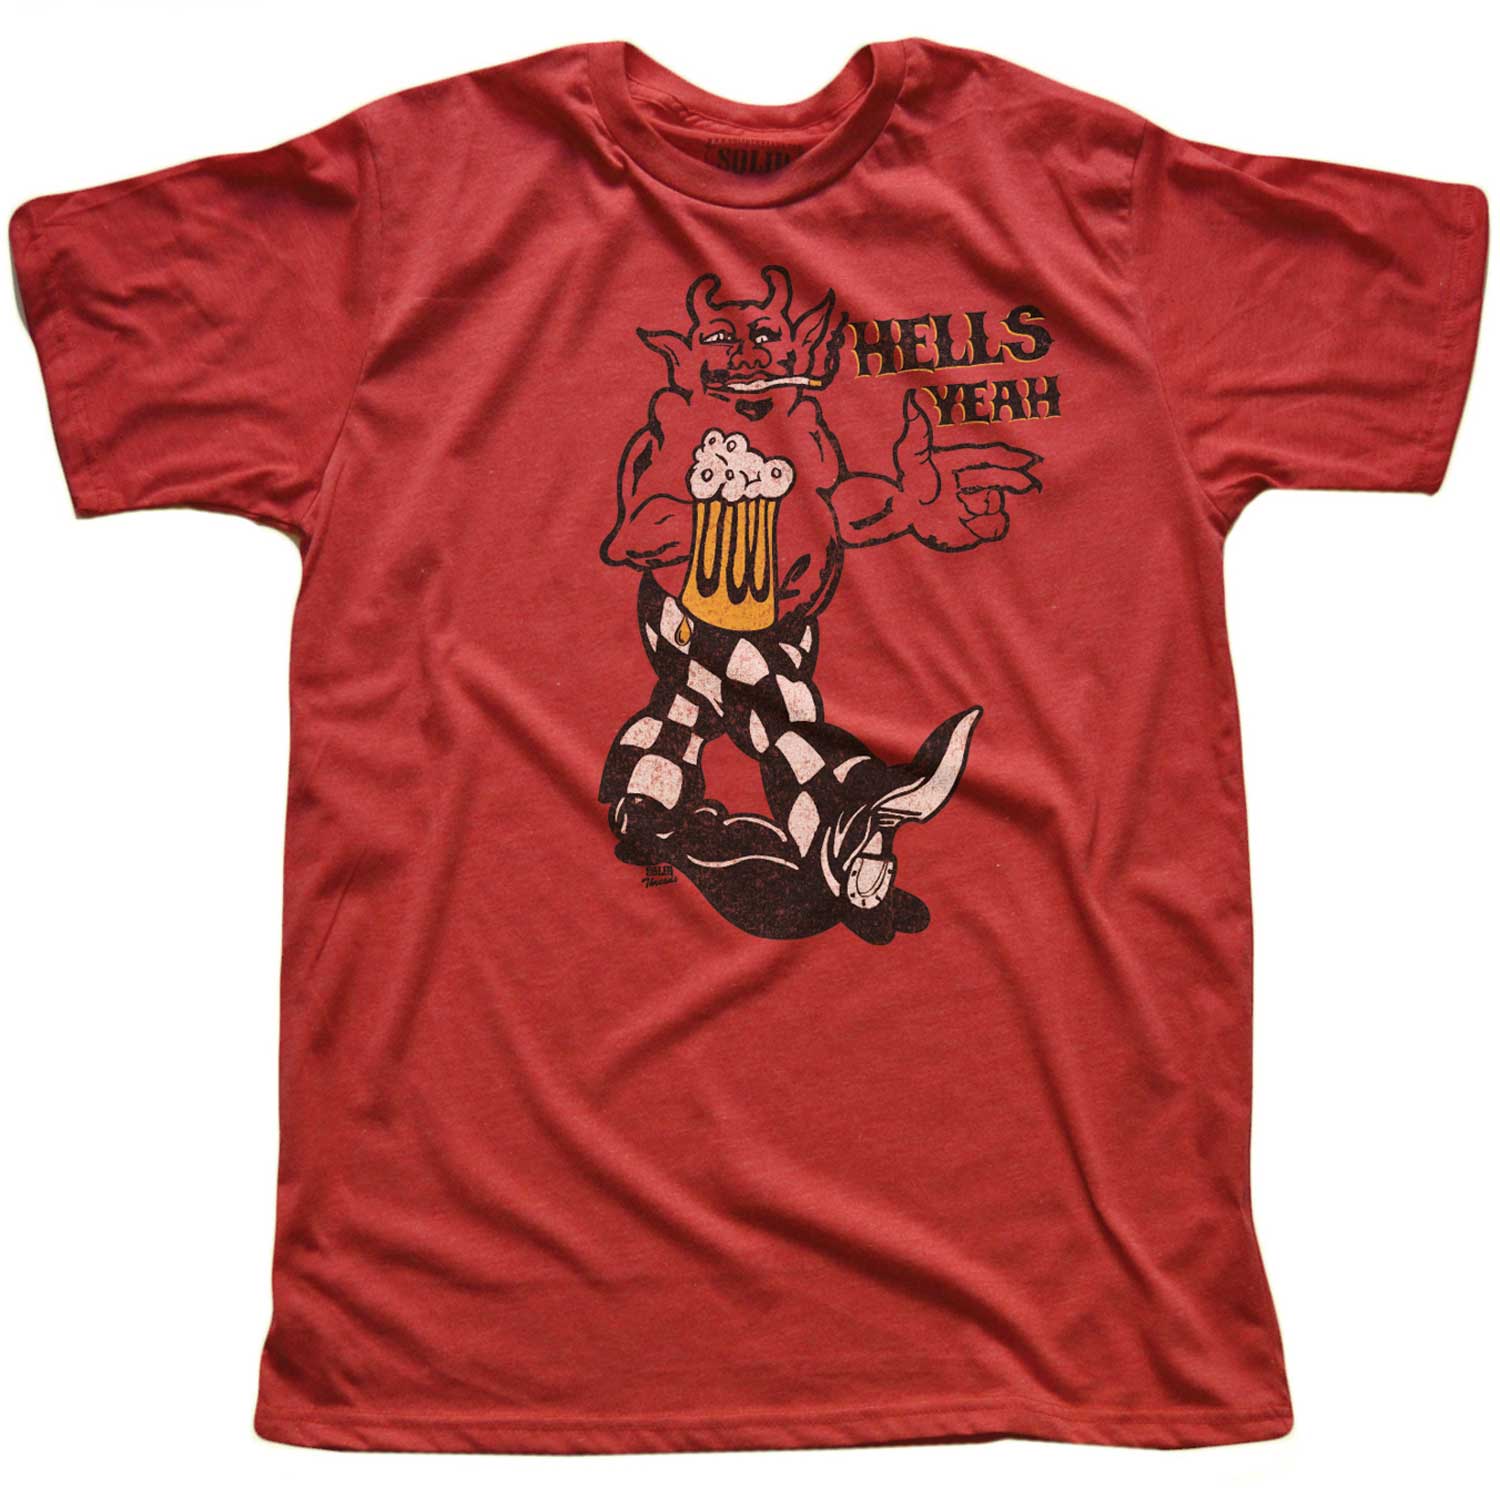 Men's Hells Yeah Vintage Devil Graphic T-Shirt | Funny Party Fiend Red Tee | Solid Threads